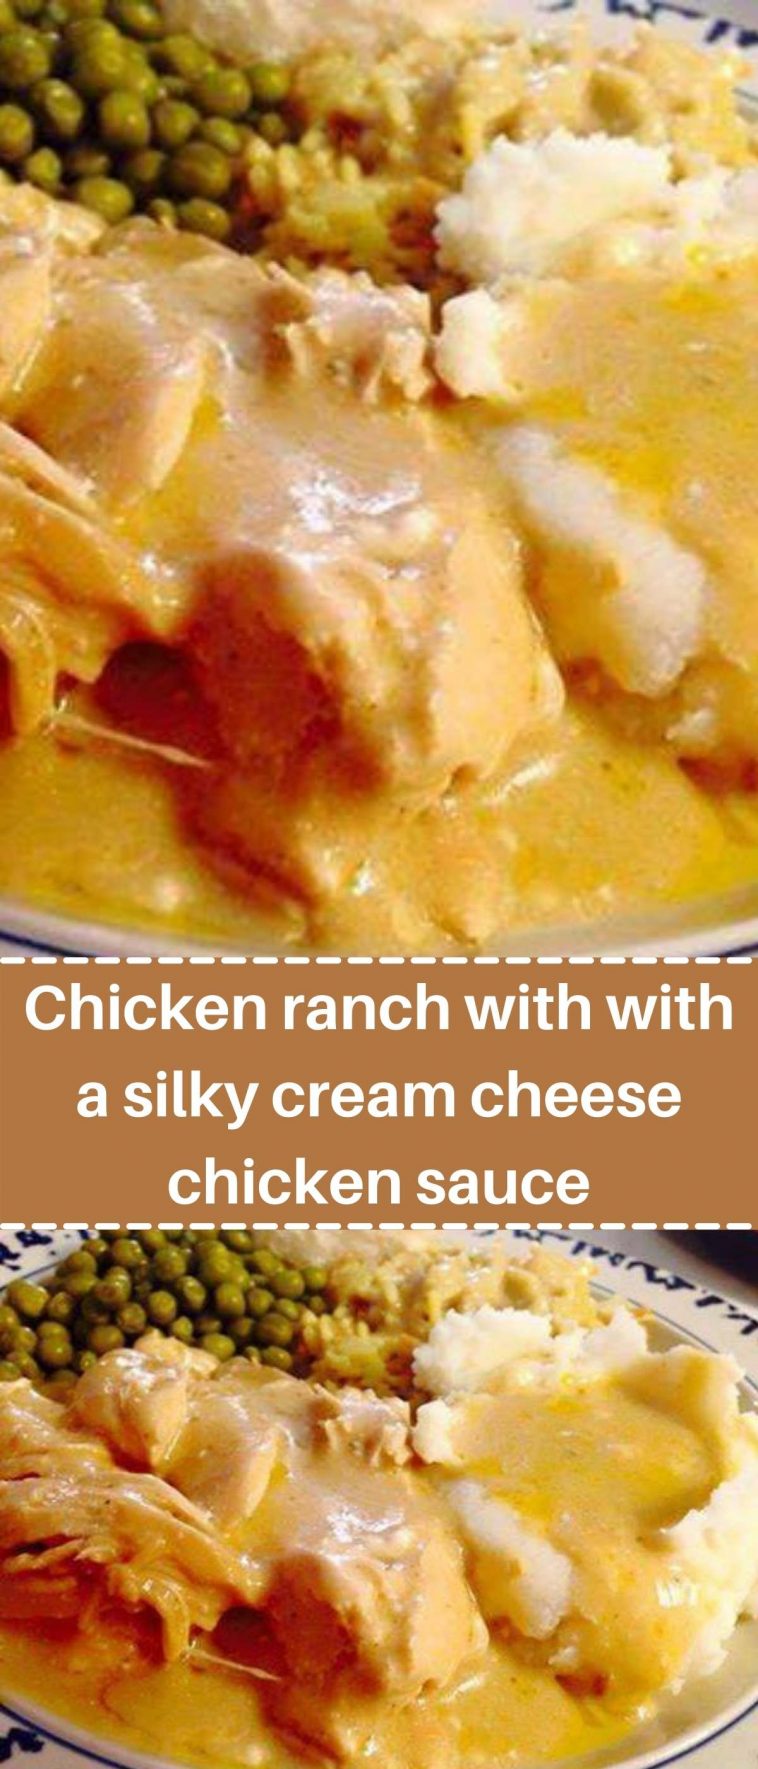 Chicken ranch with with a silky cream cheese chicken sauce